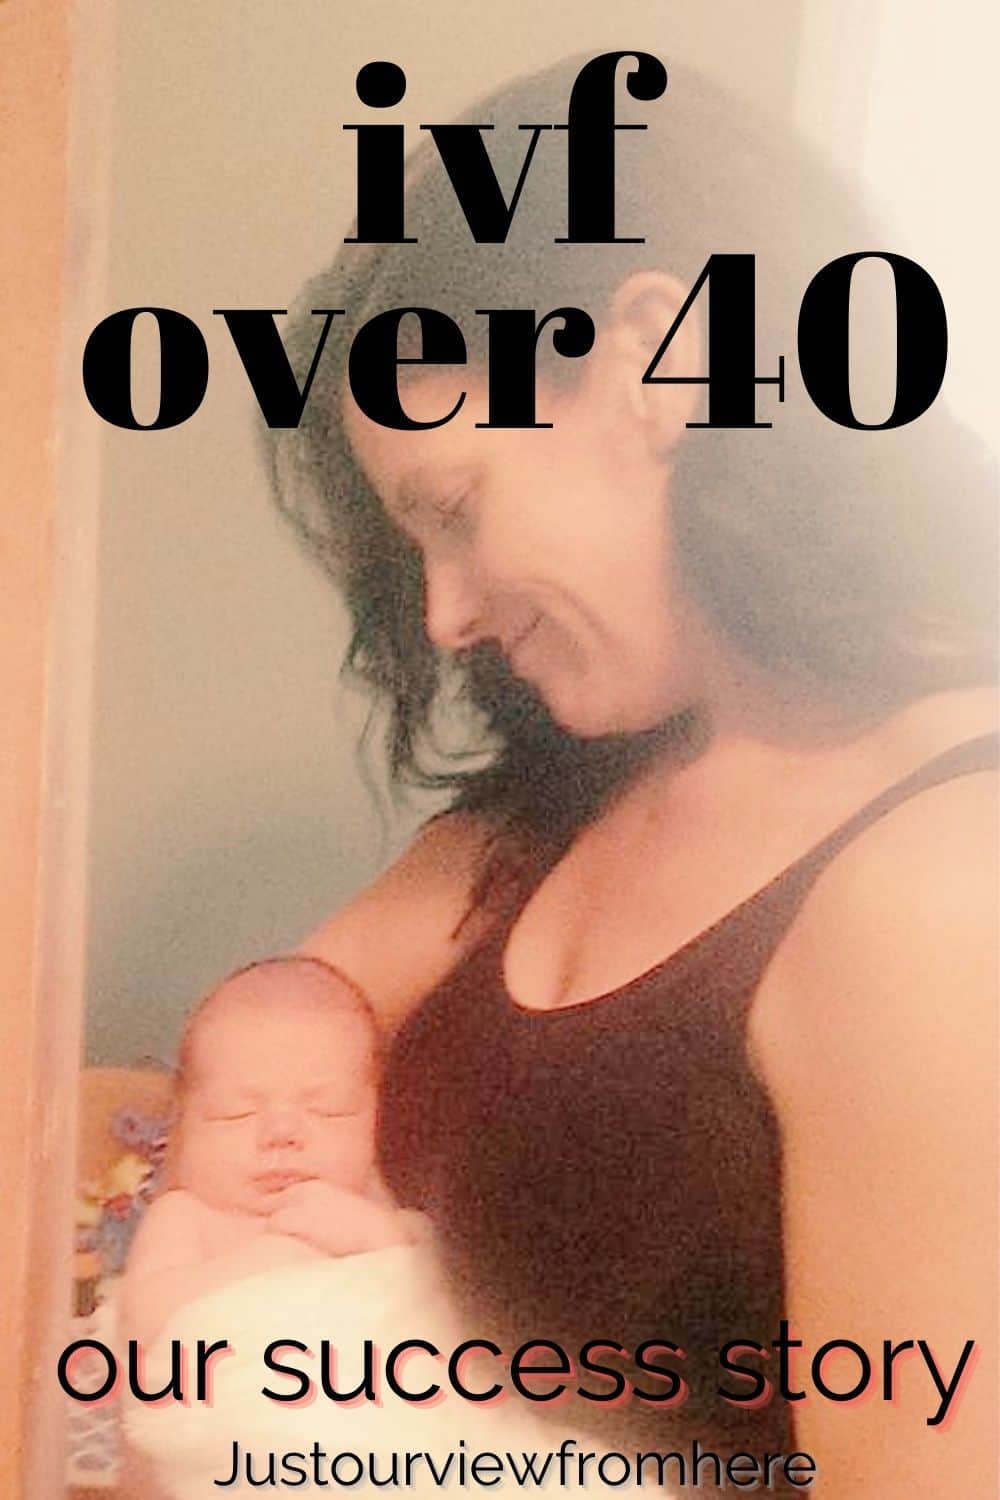 smiling mom holding and looking down on newborn baby, text overlay IVF over 40 our success story